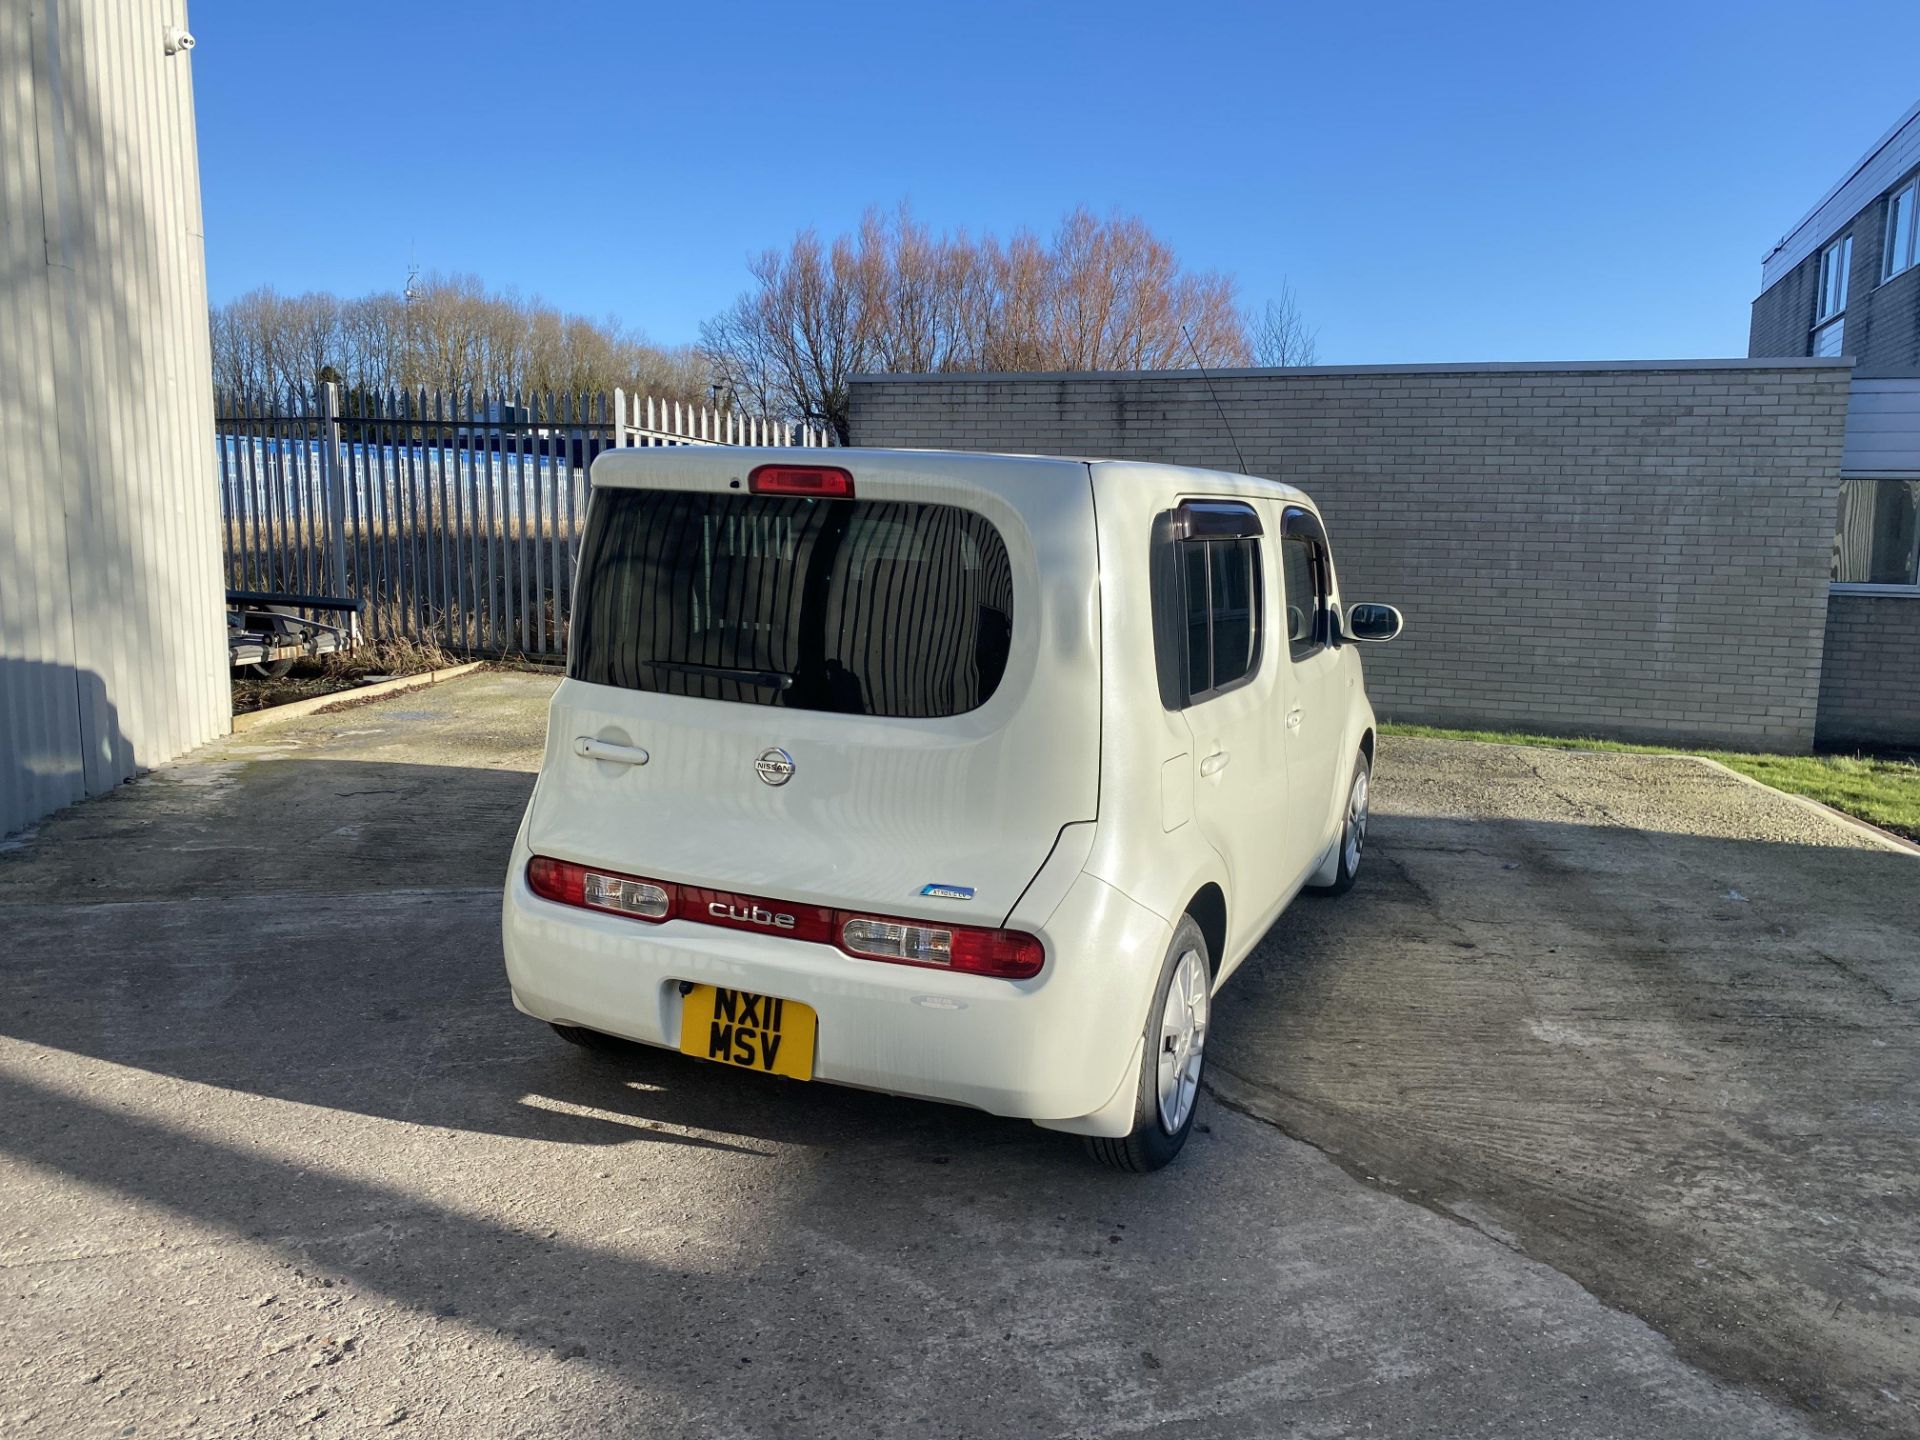 Nissan Cube - Image 4 of 33